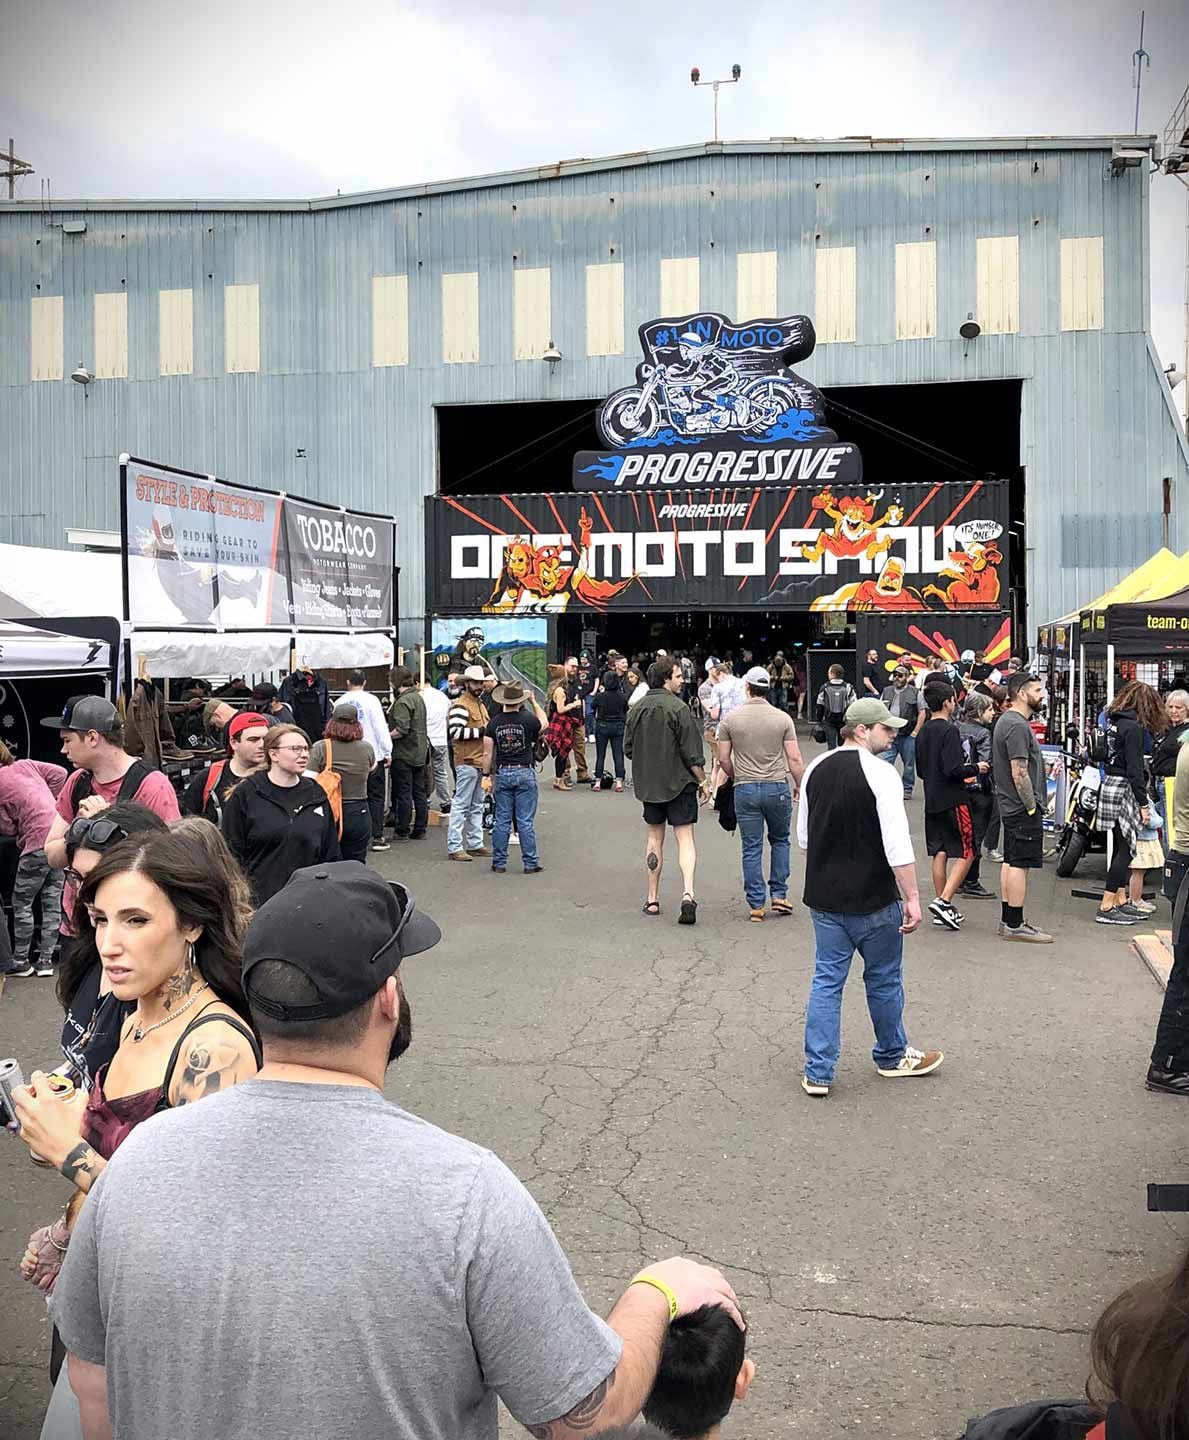 See you at next year’s edition of The One Moto Show.